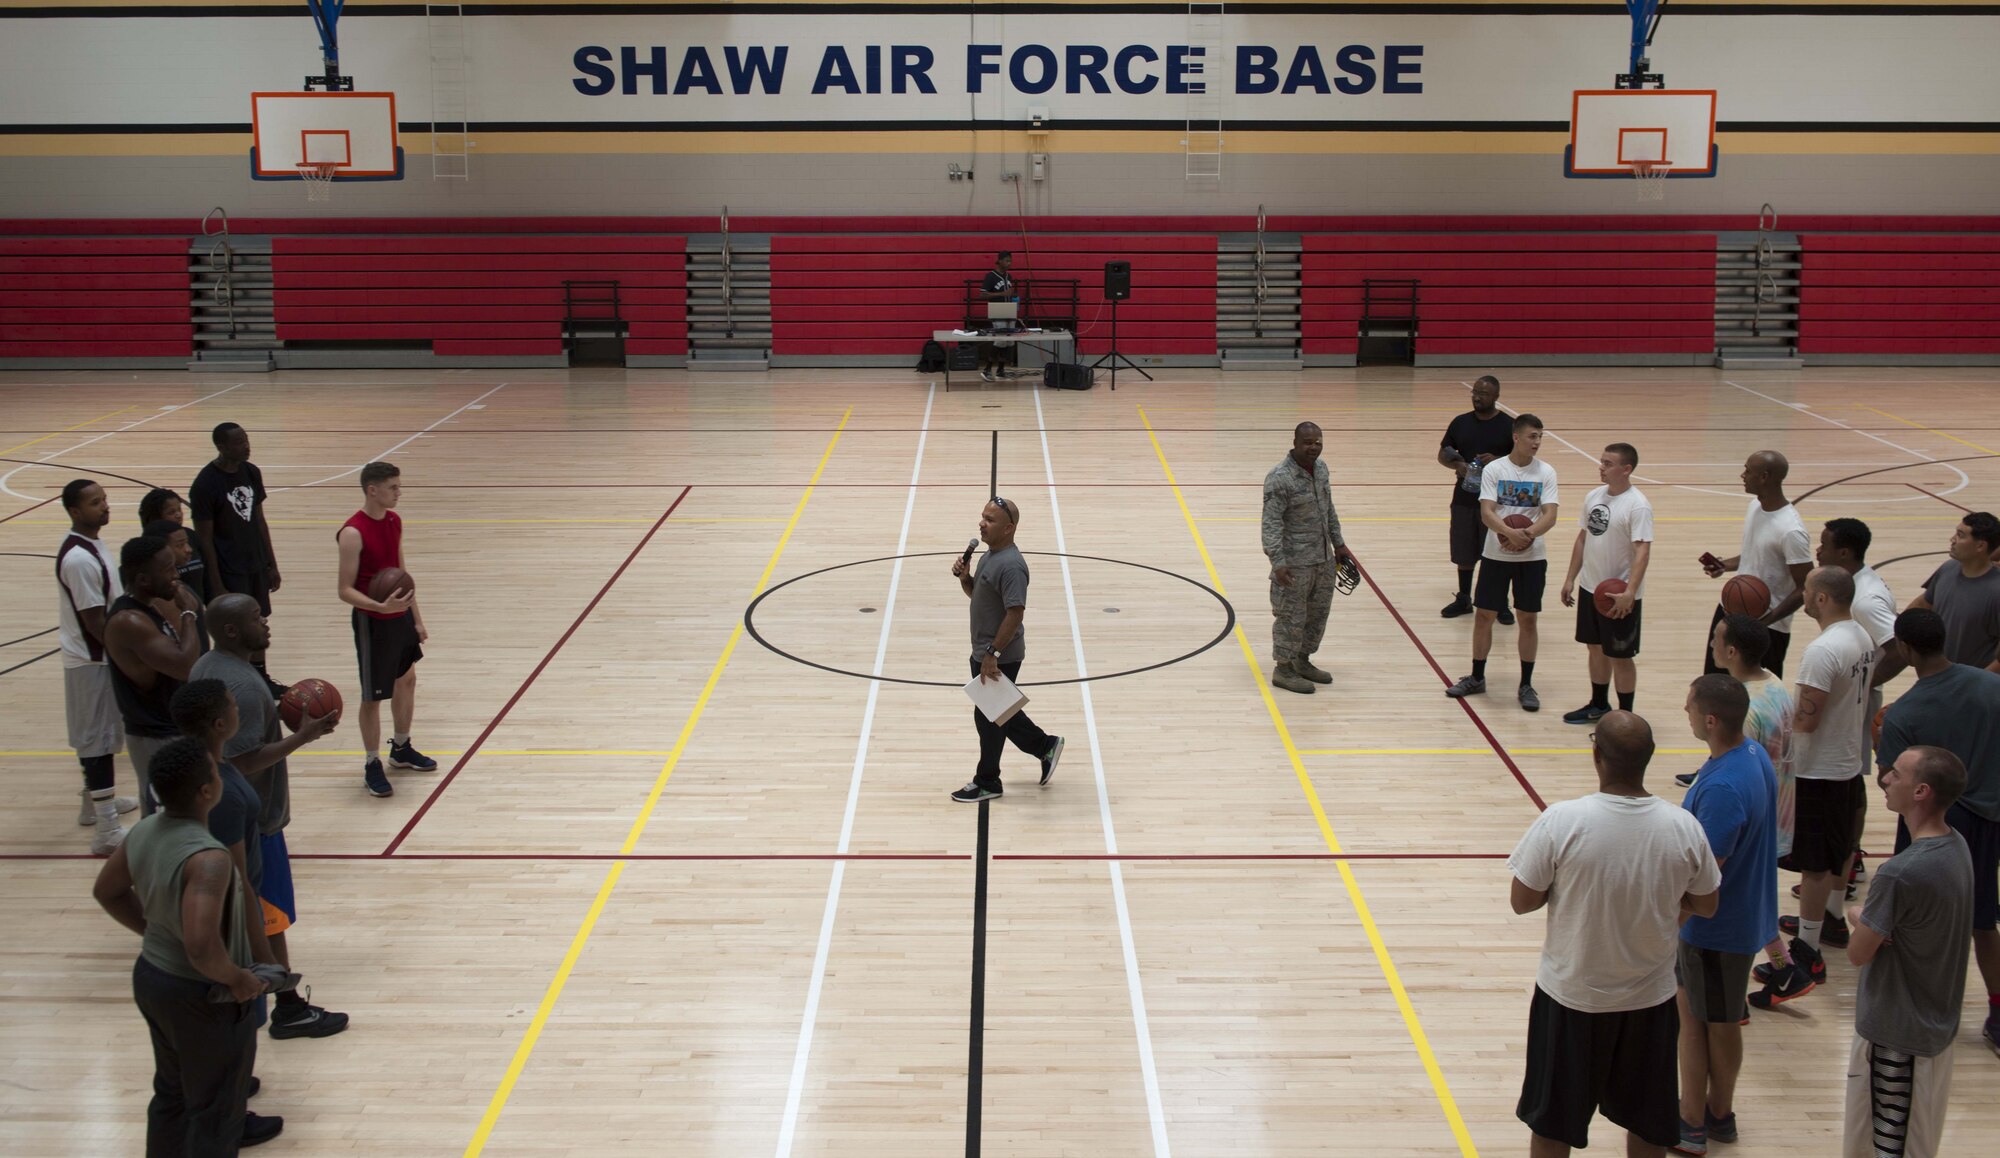 U.S. Air Force Chaplain (Capt.) Eddie Rubero, 20th Fighter Wing chaplain, briefs Team Shaw members at the 20th Force Support Squadron main fitness center at Shaw Air Force Base, S.C., June 15, 2018.